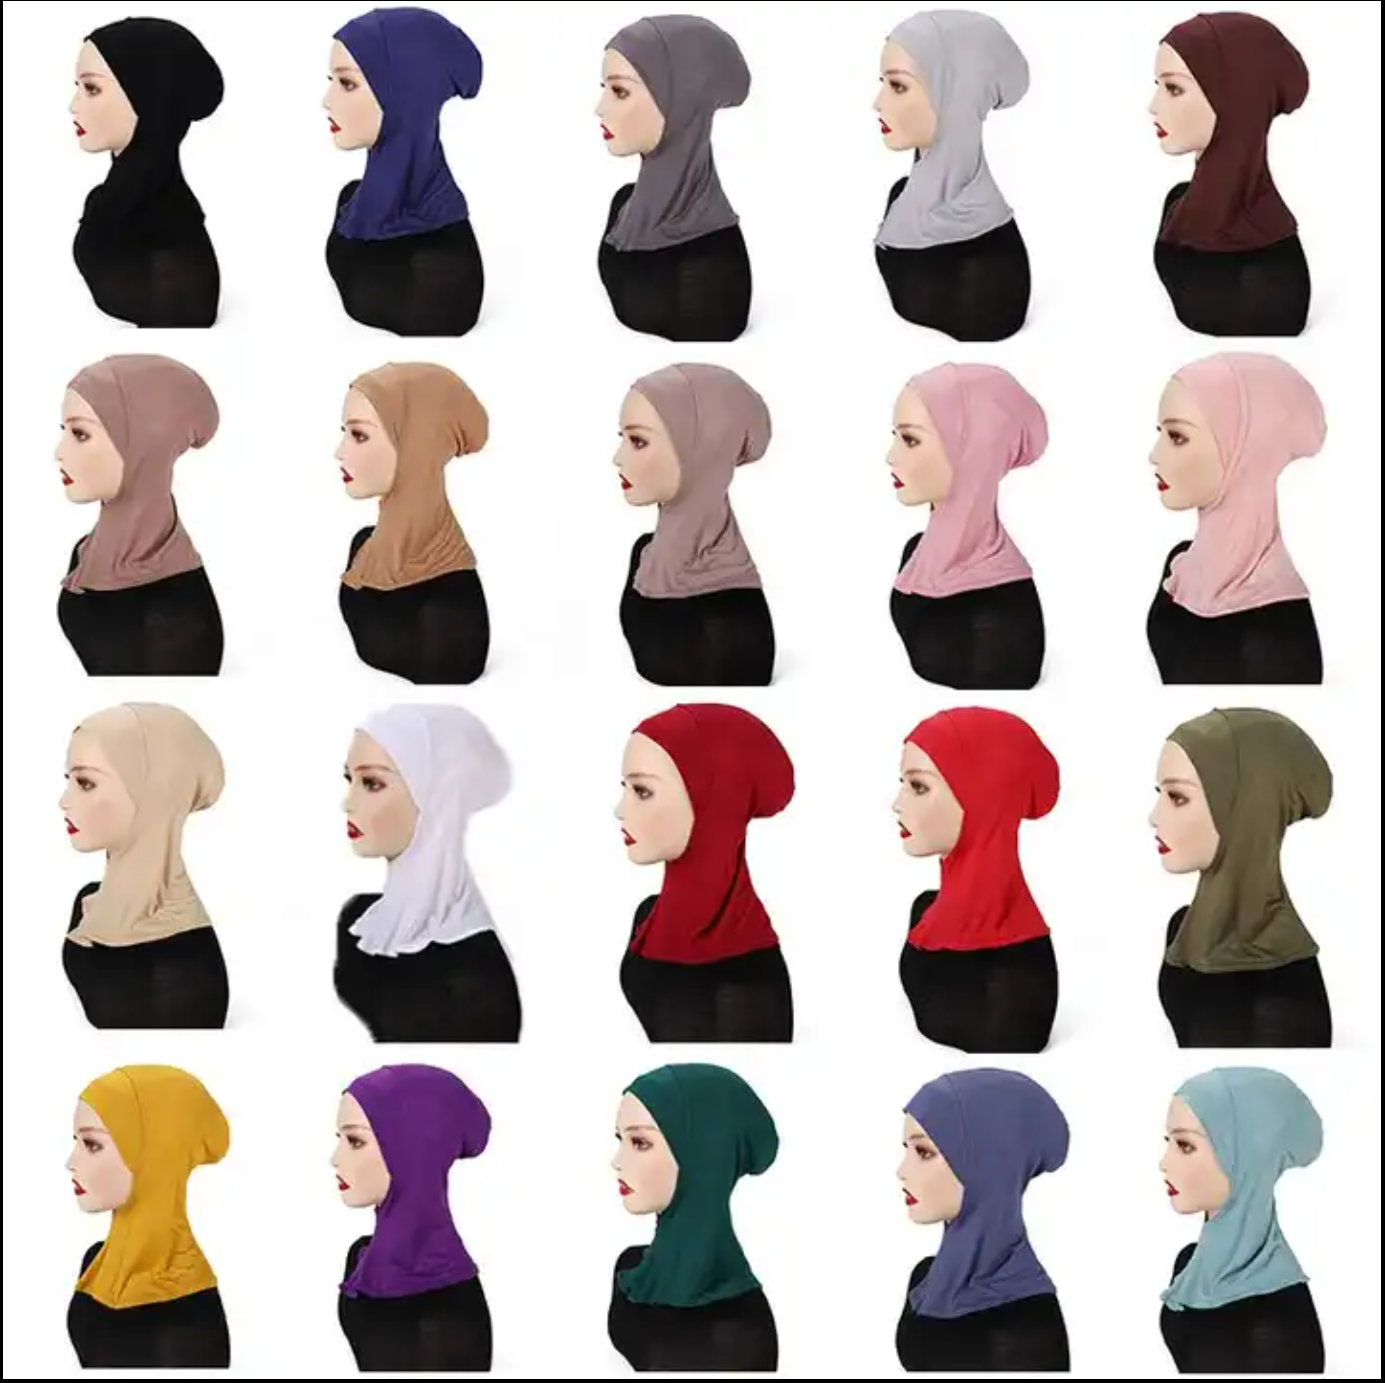 Hijab under hat for full neck coverage -  Ninja Style